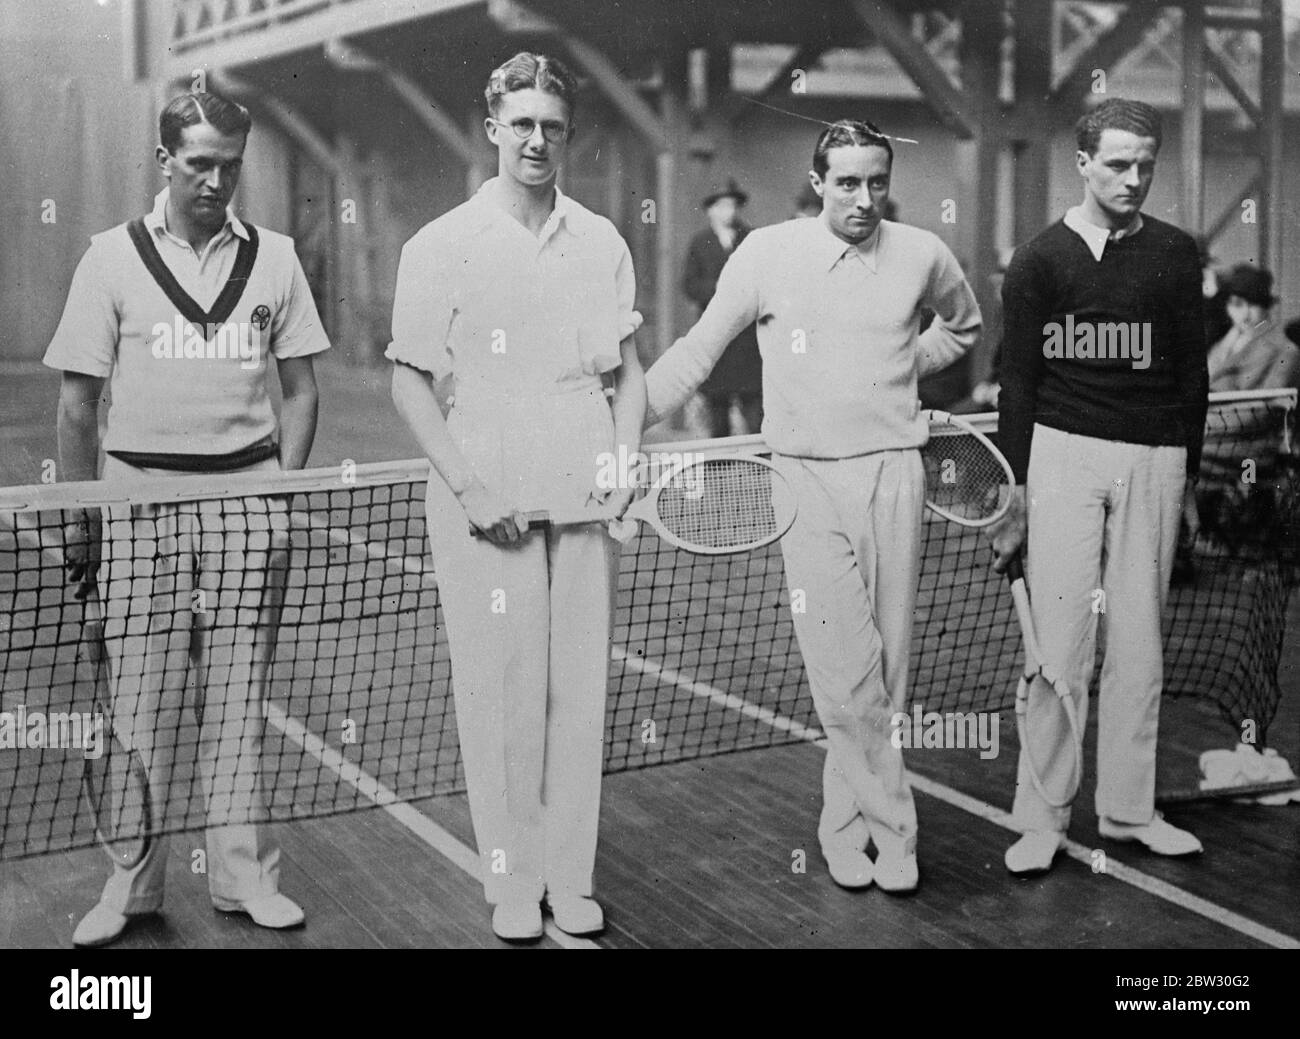 Paris London tennis matches open in Paris . Left to right H N Lee and H K Lester , of England , P Peret and P Golschmidt of France , just before the start of their game at the Tennis club in Paris in the Paris versus London inter city tournaments . 19 March 1932 . Stock Photo